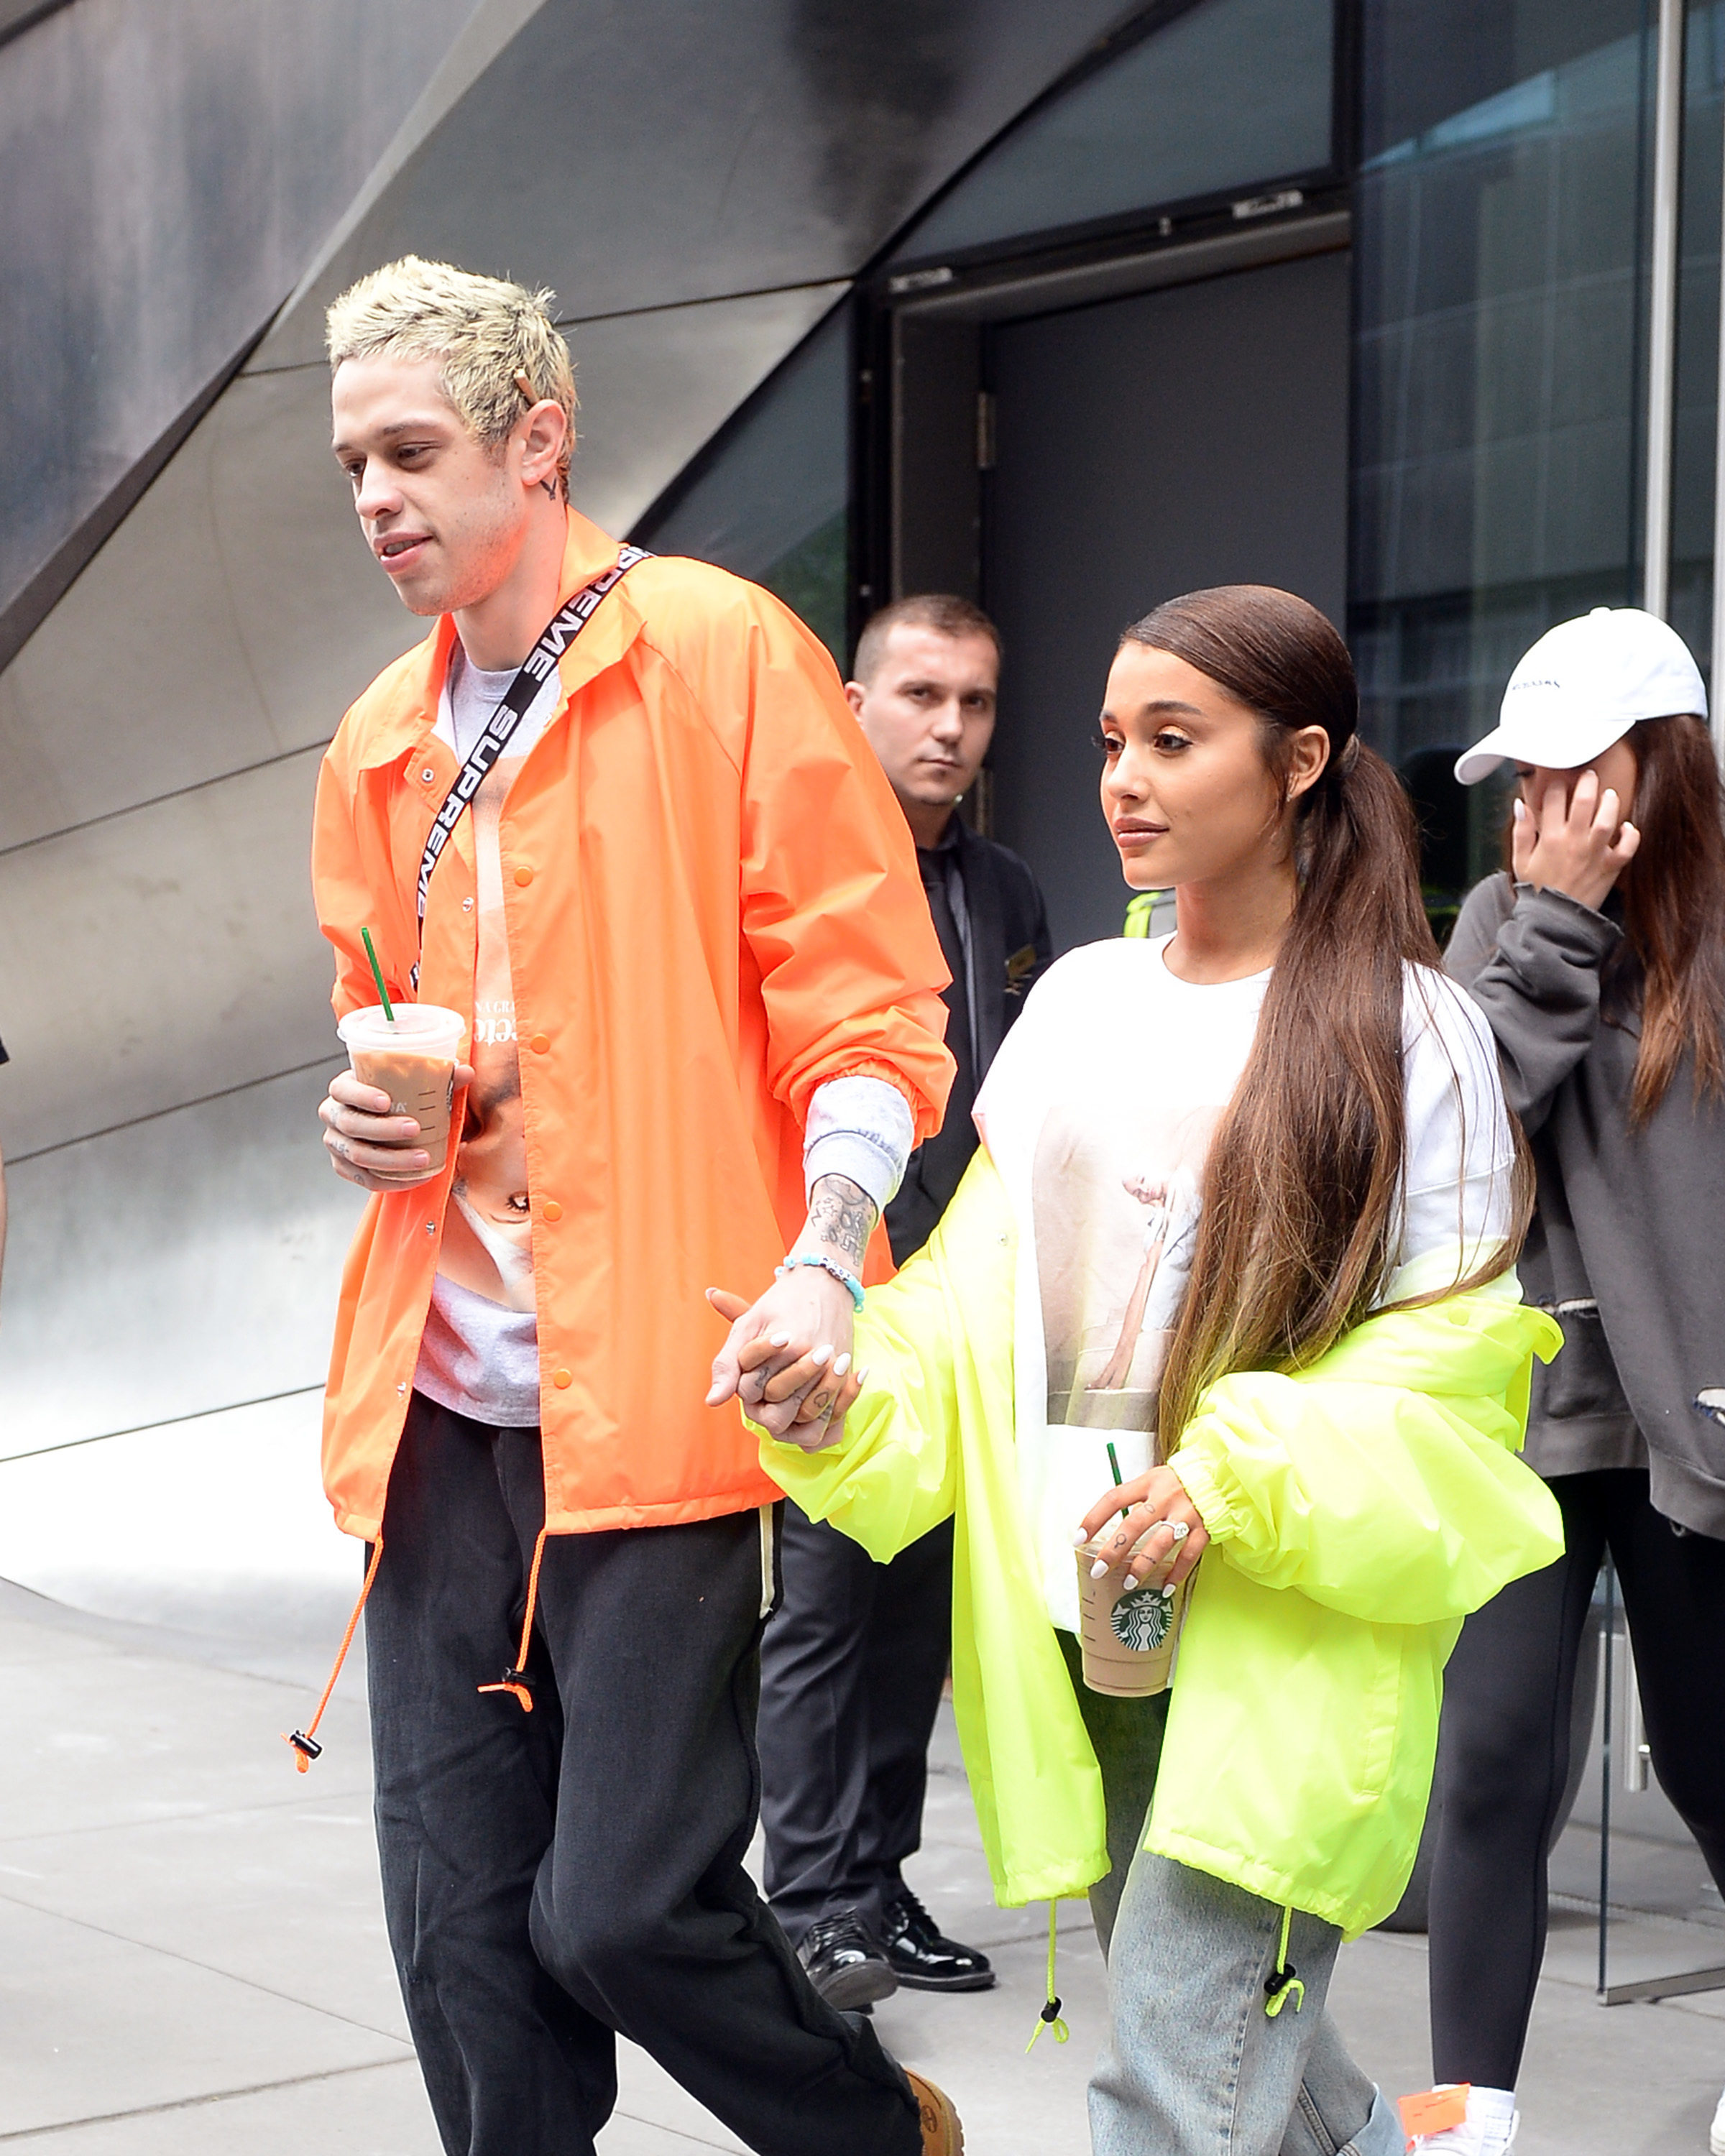 Ariana Grande Replaces Pete Davidson Engagement Ring With Friendship Ring